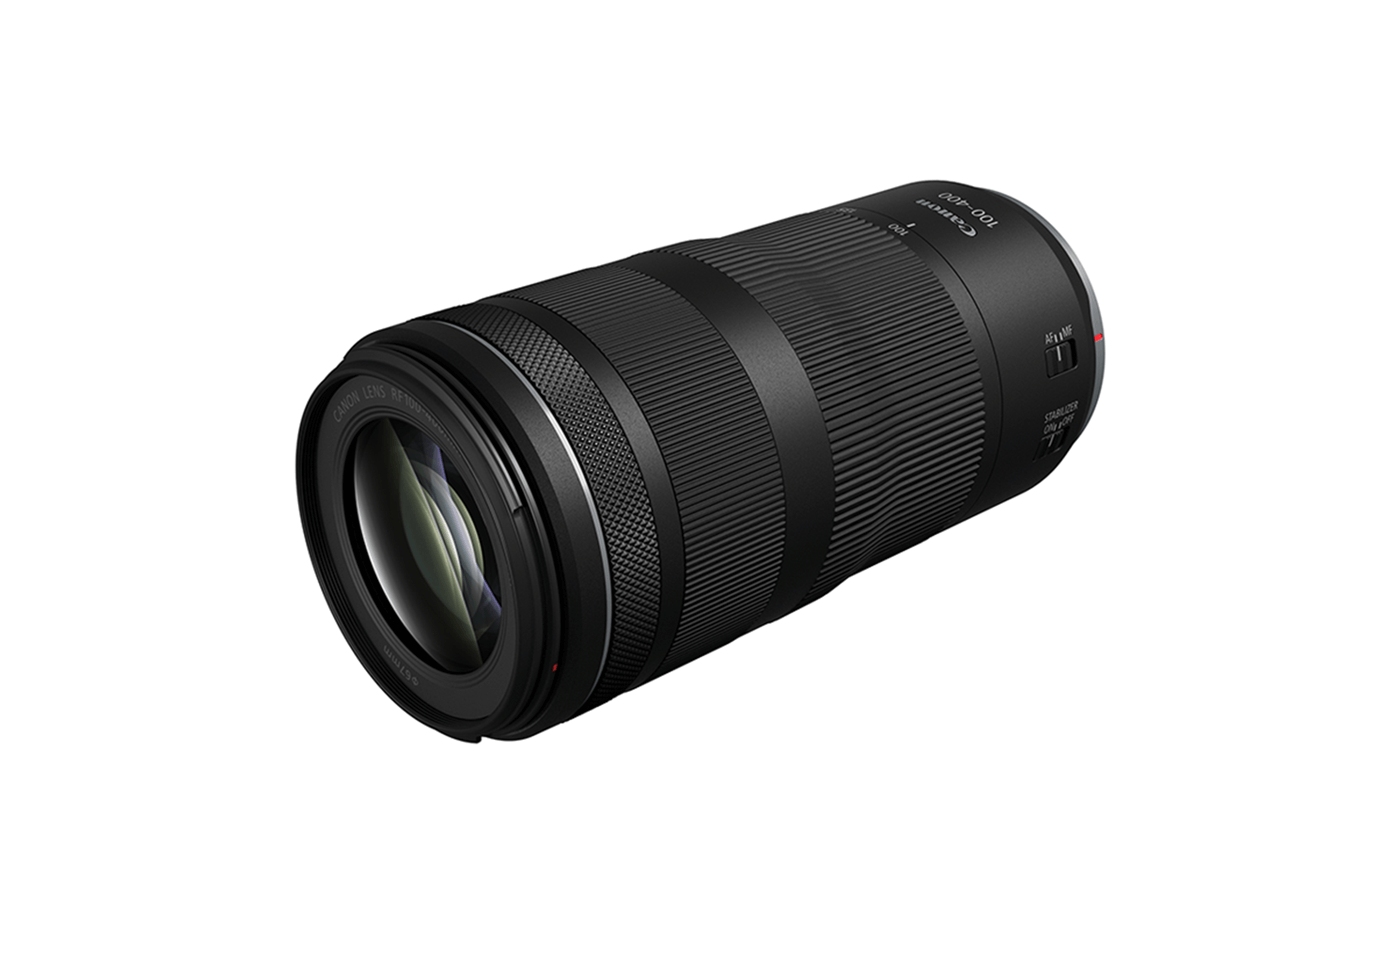 Front profile image of RF 100-400mm F5.6-8 IS USM telephoto lens